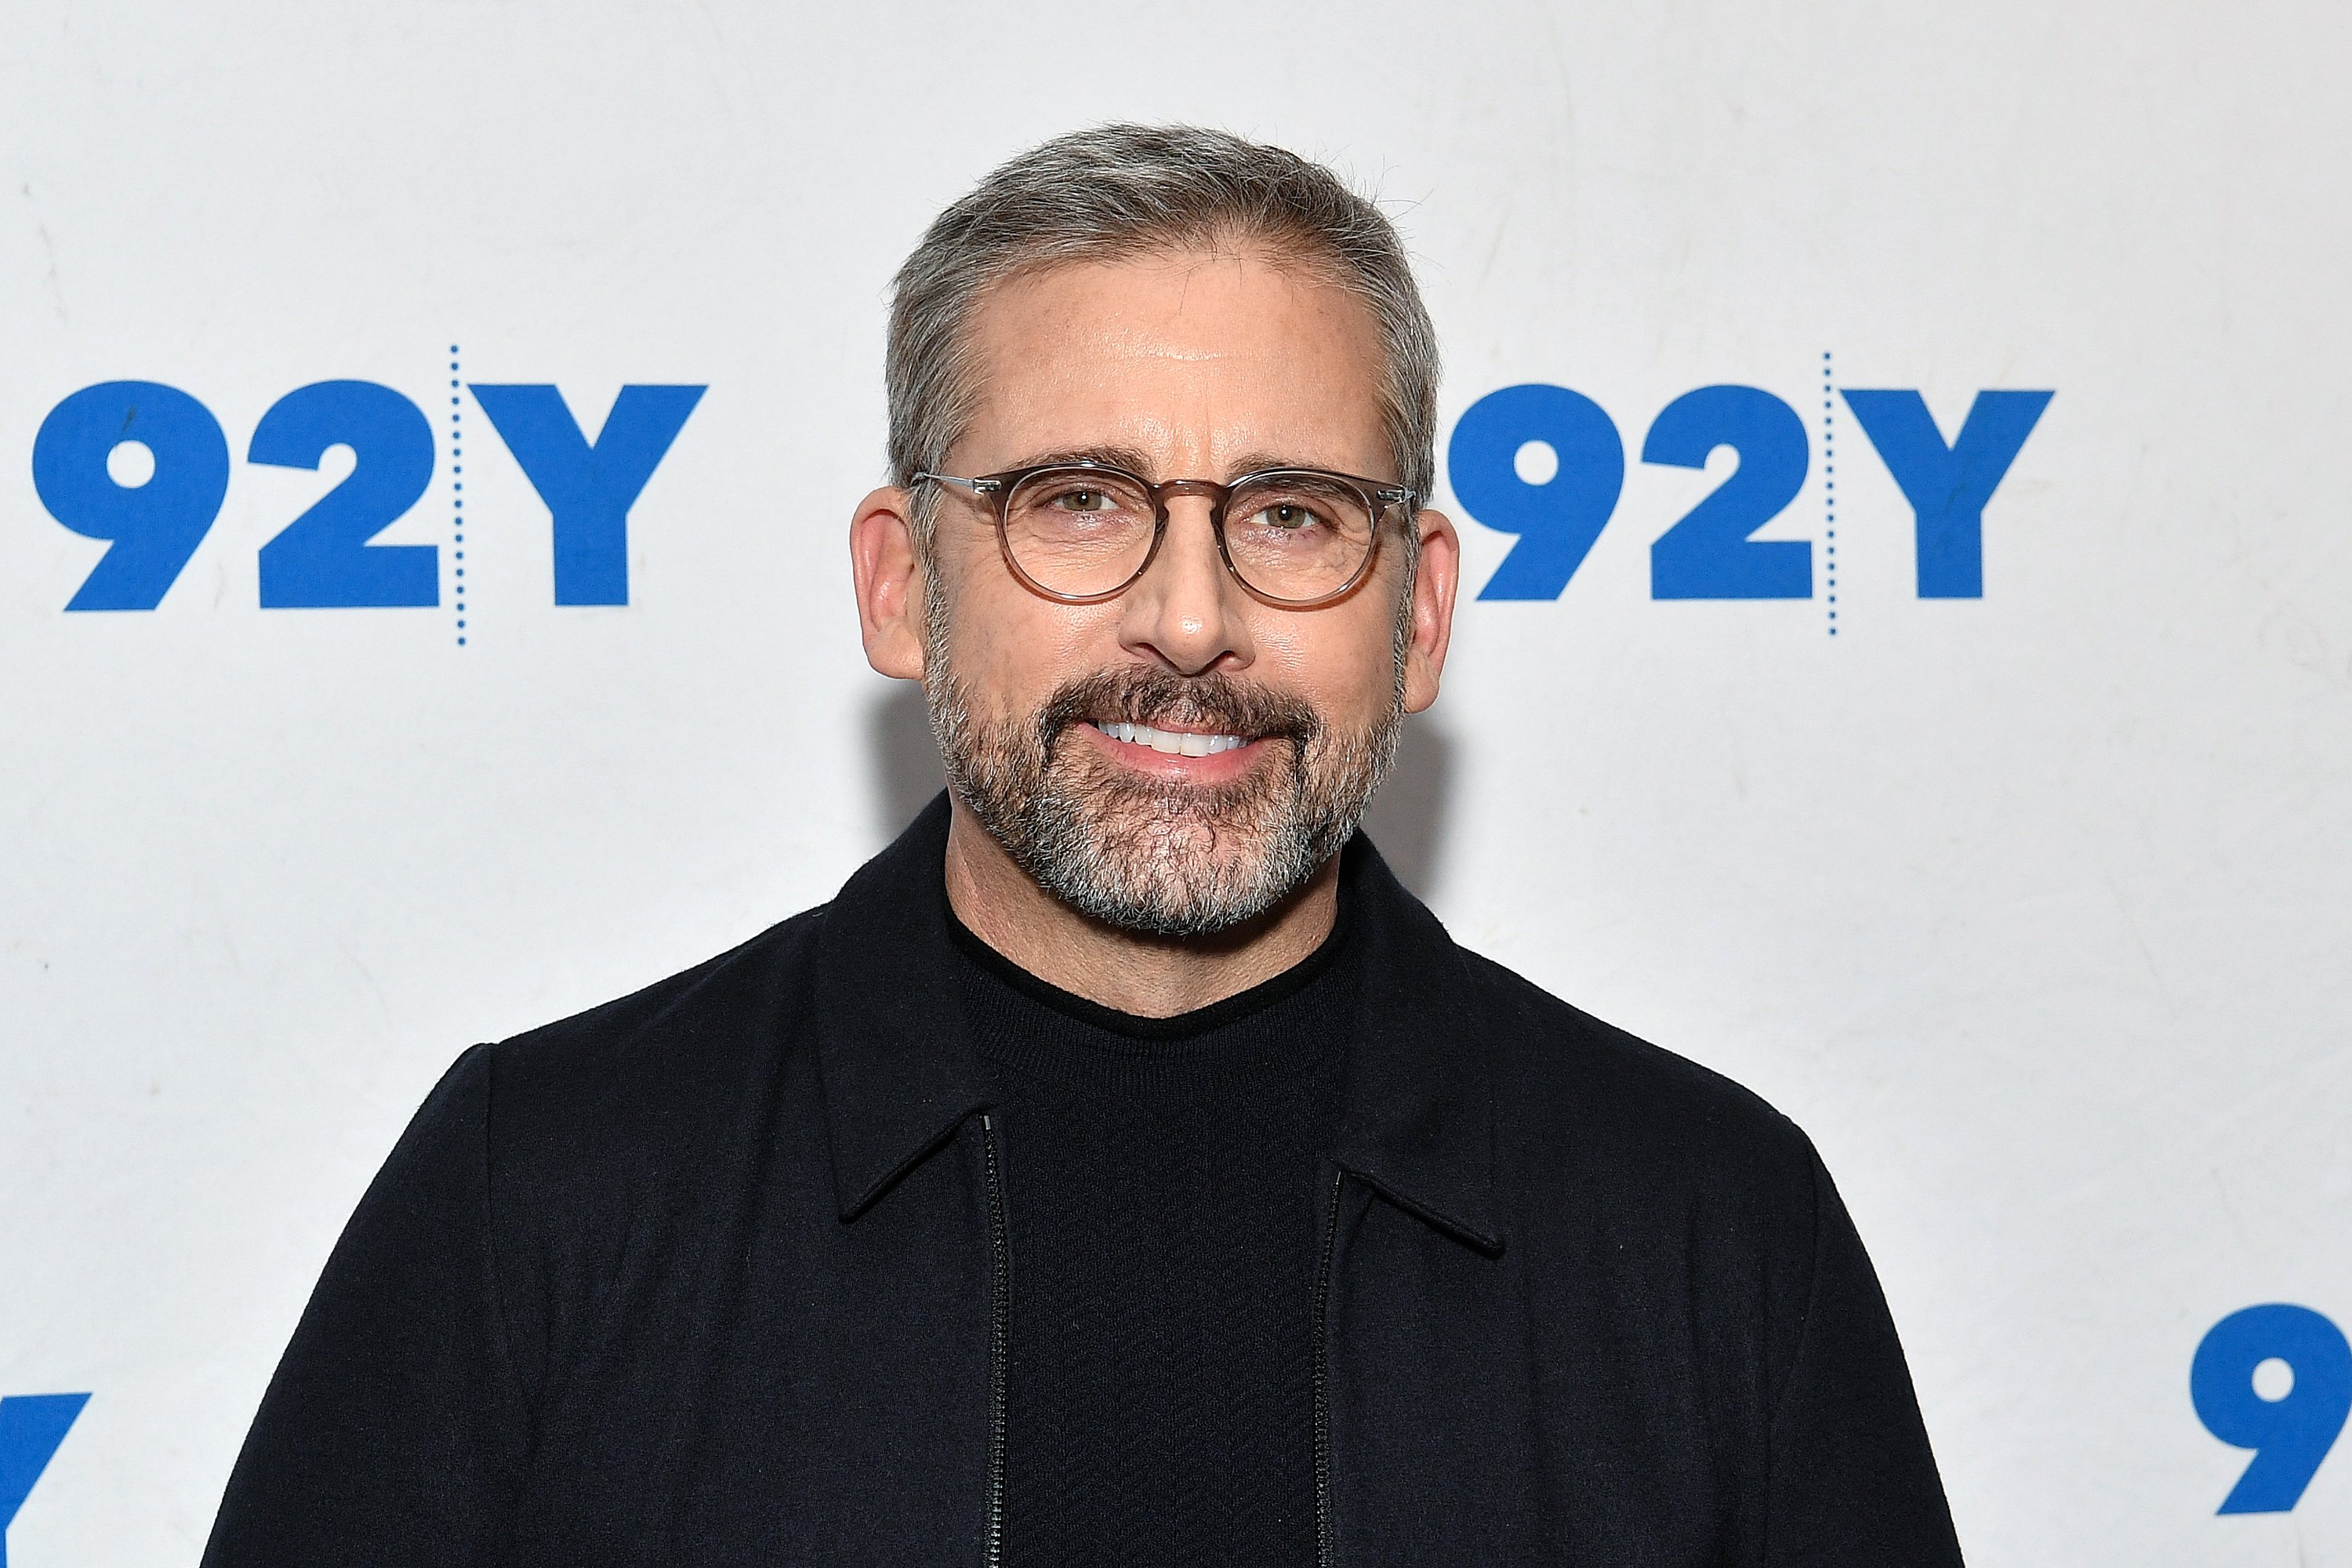 Steve Carell attends the "Welcome to Marwen" Screening & Conversation with Steve Carell at 92nd Street Y on December 20, 2018 in New York City | Photo: GettyImages